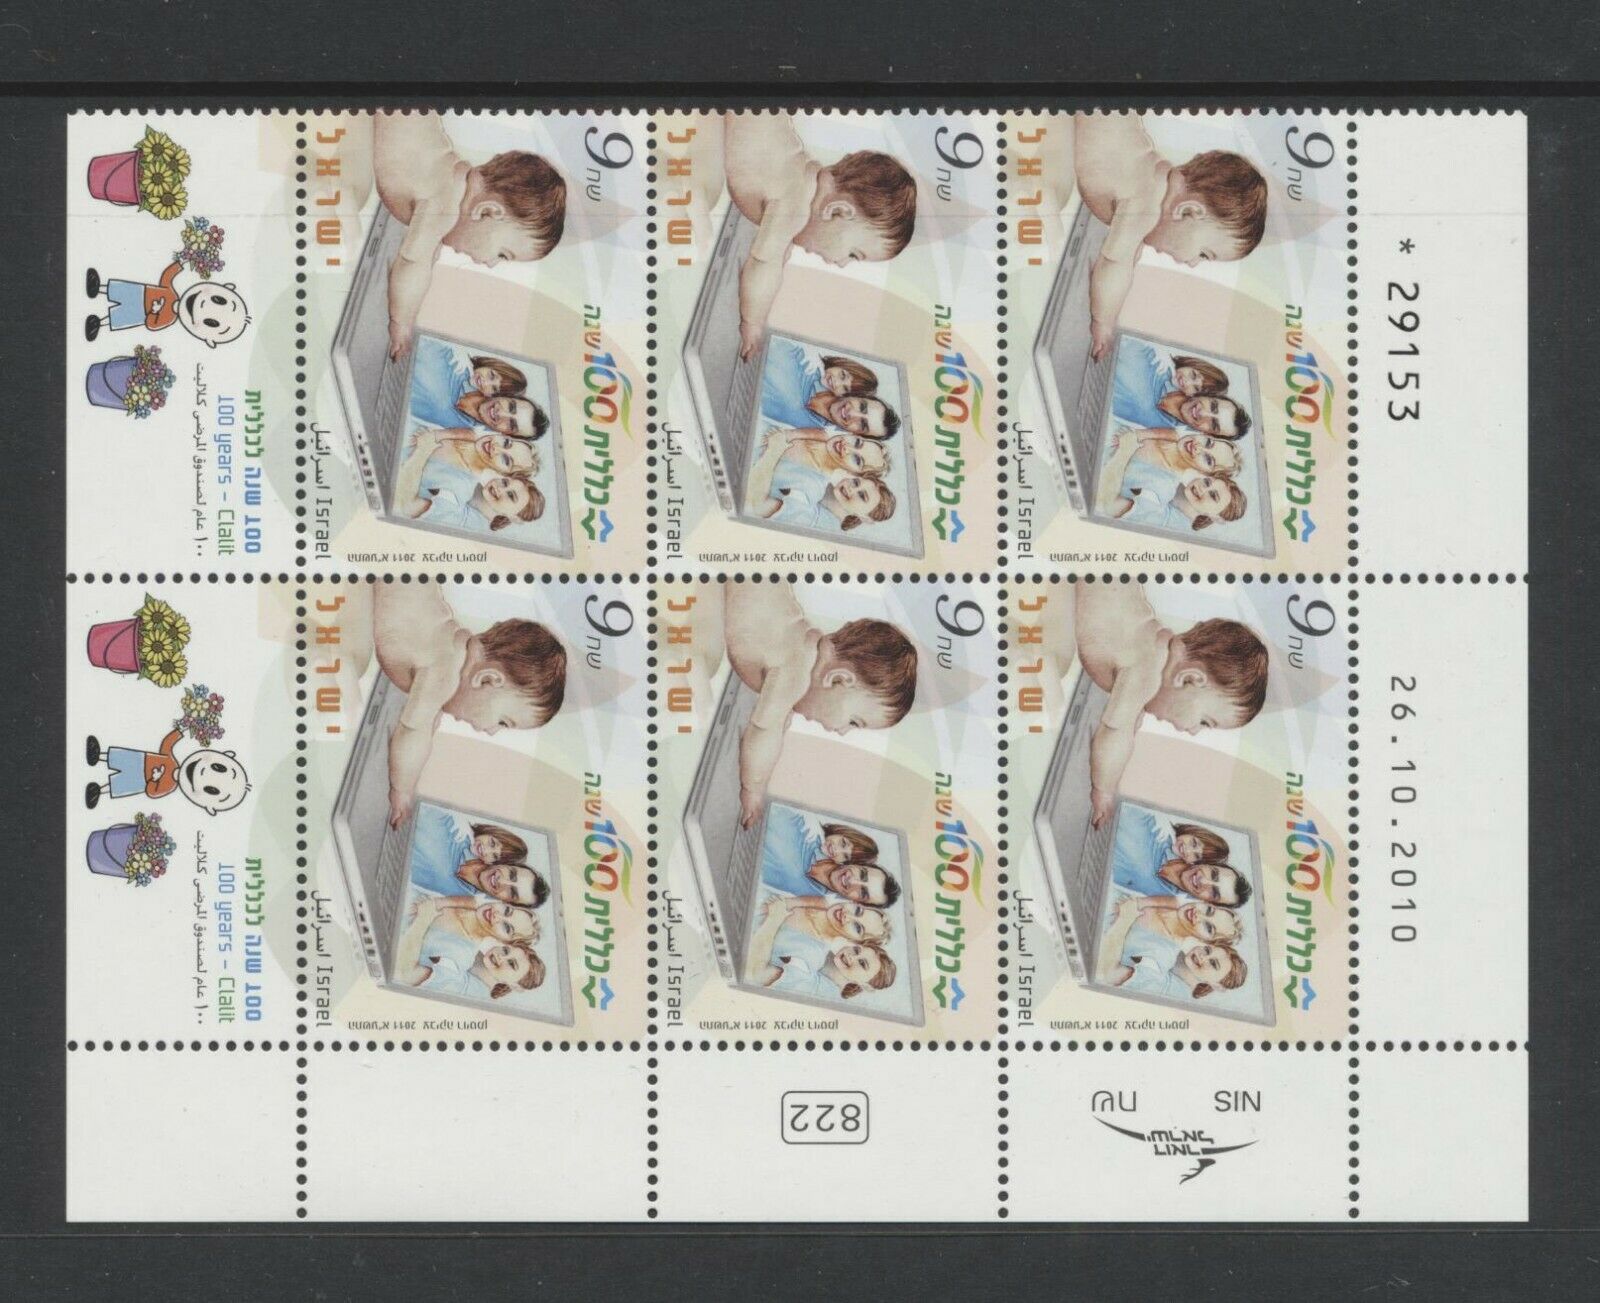 Israel 2011 Clalit Health Care Baby Seeing Family Online Vf Nh Face 54 Nis